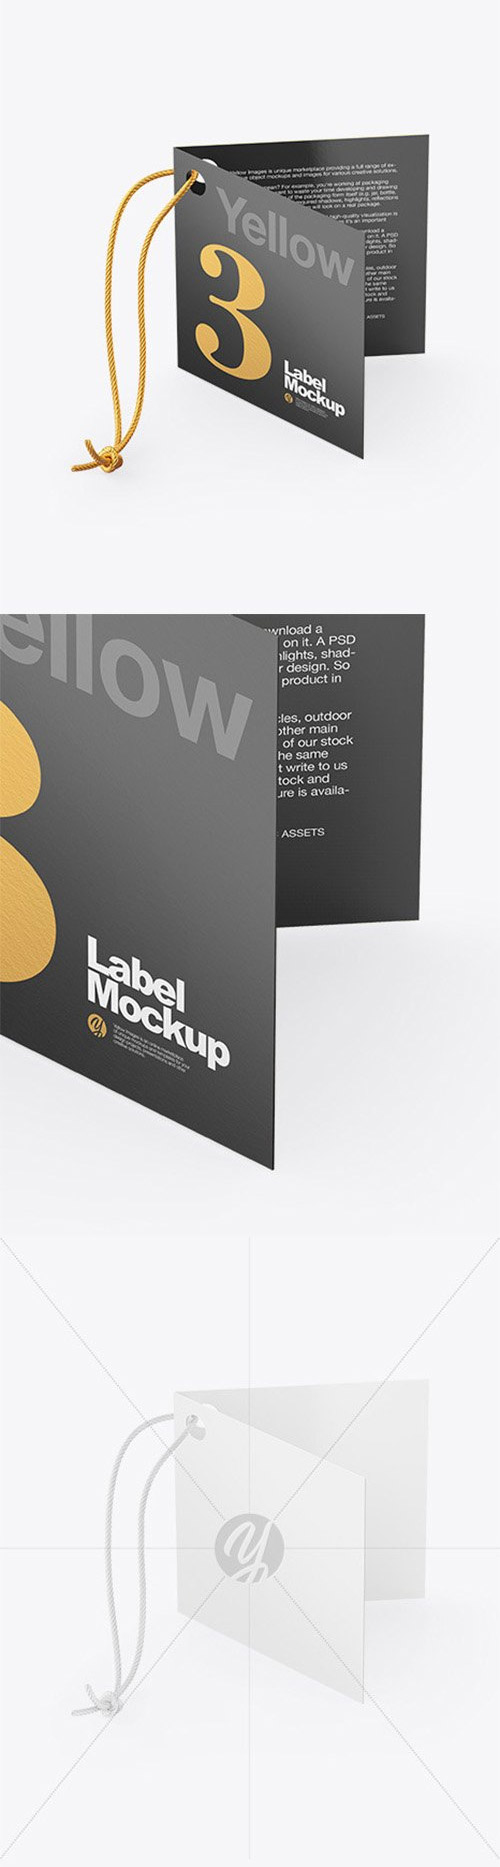 Textured Folded Label With Rope Mockup 66256